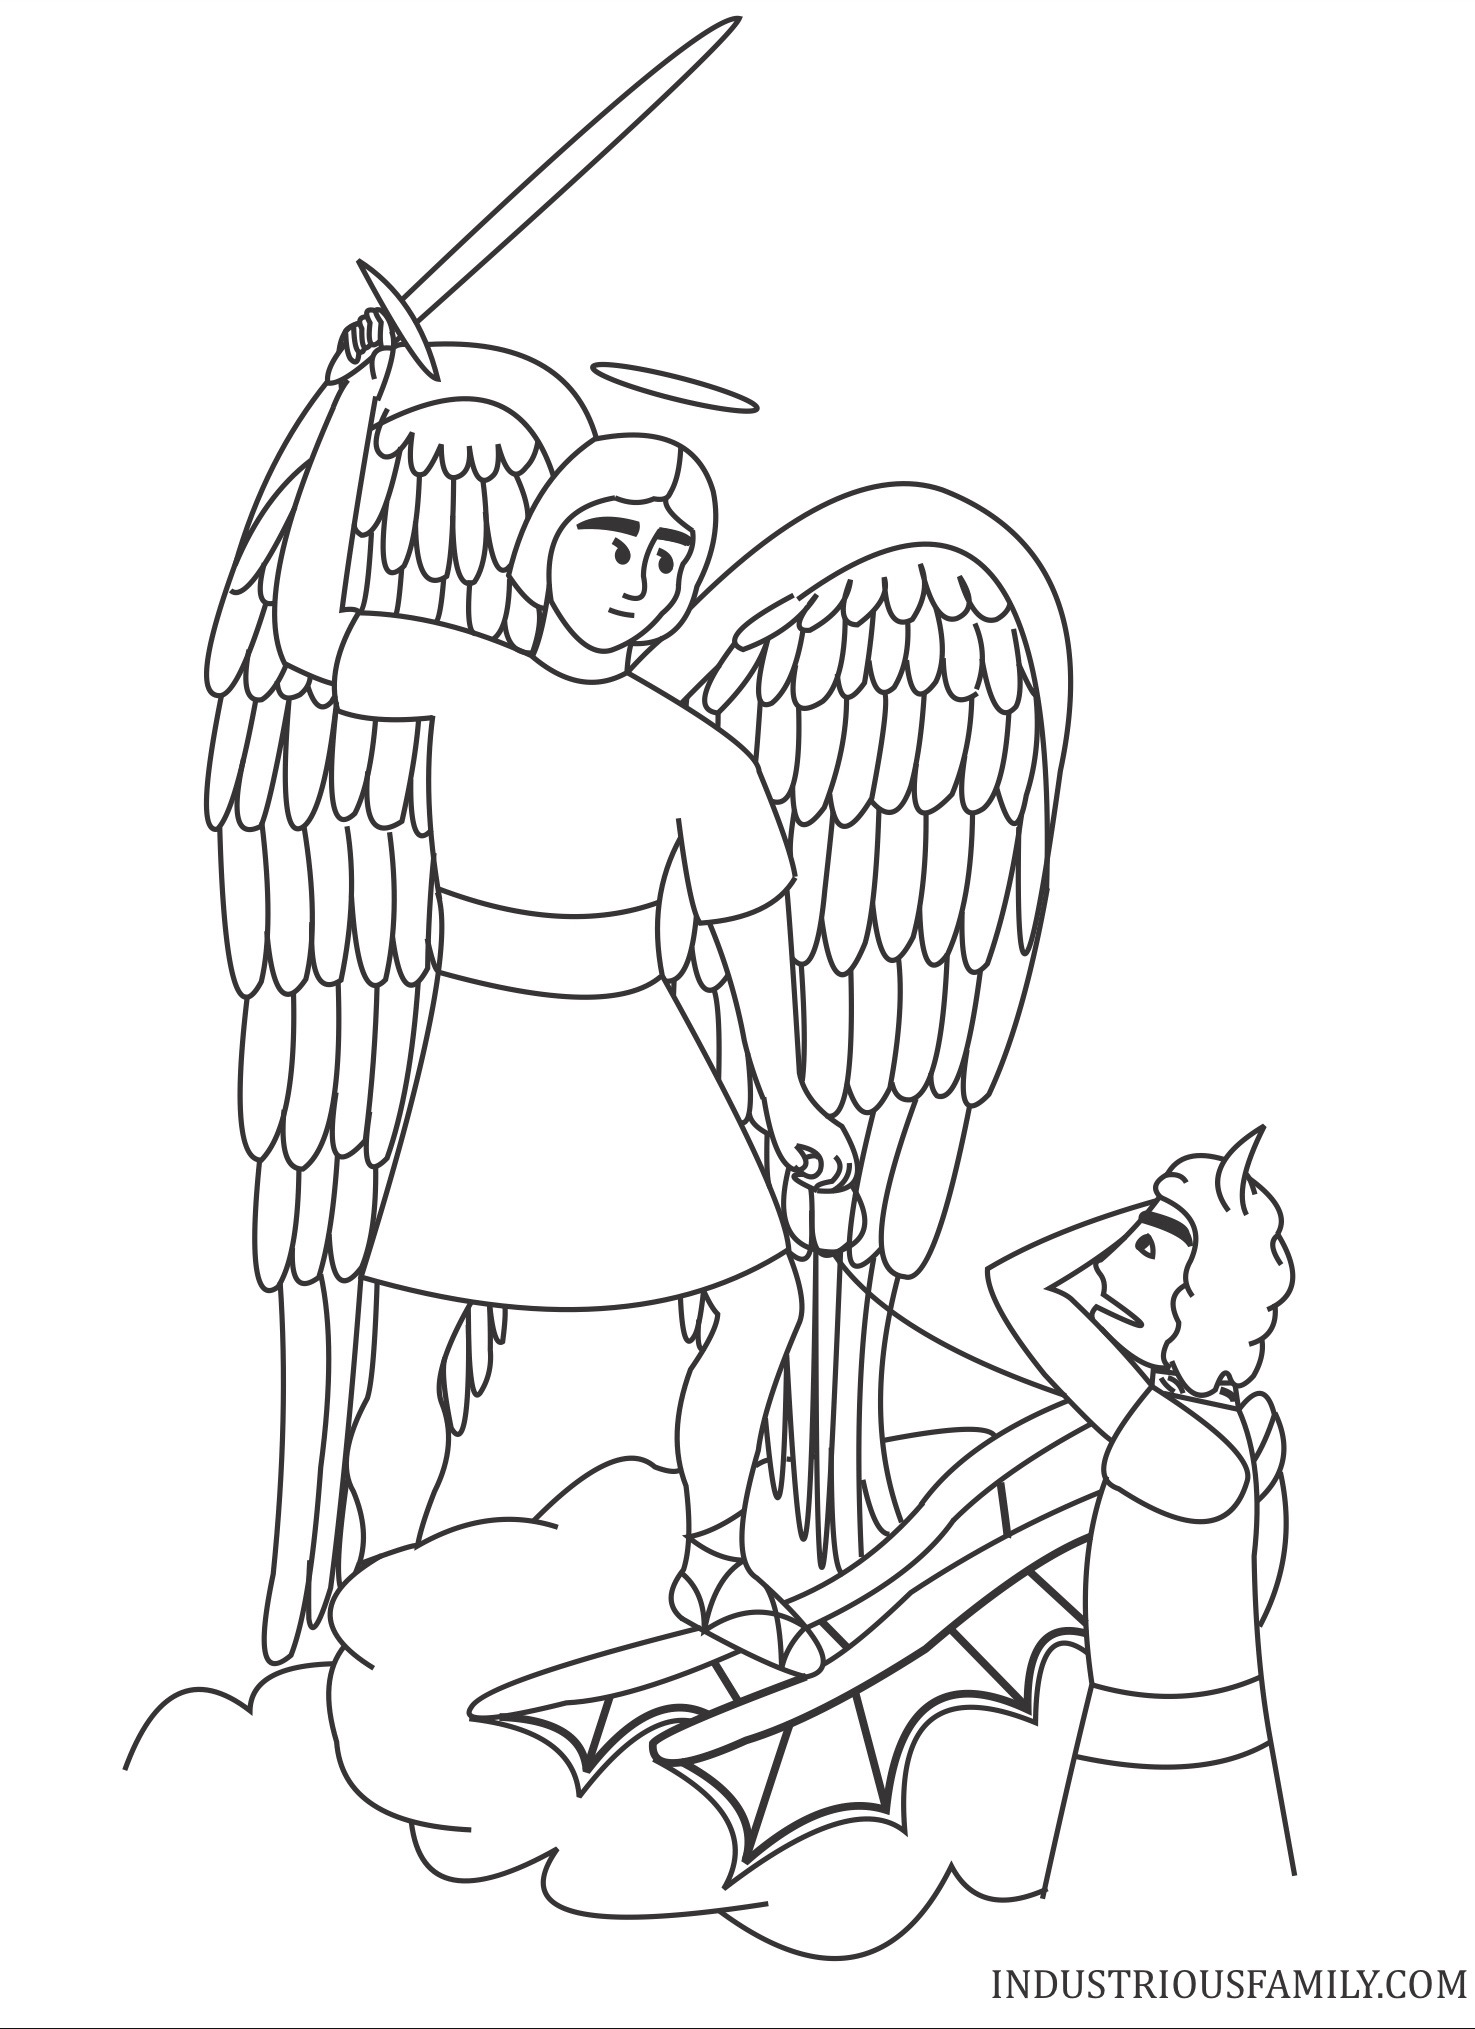 Free Coloring Pages For Catholics